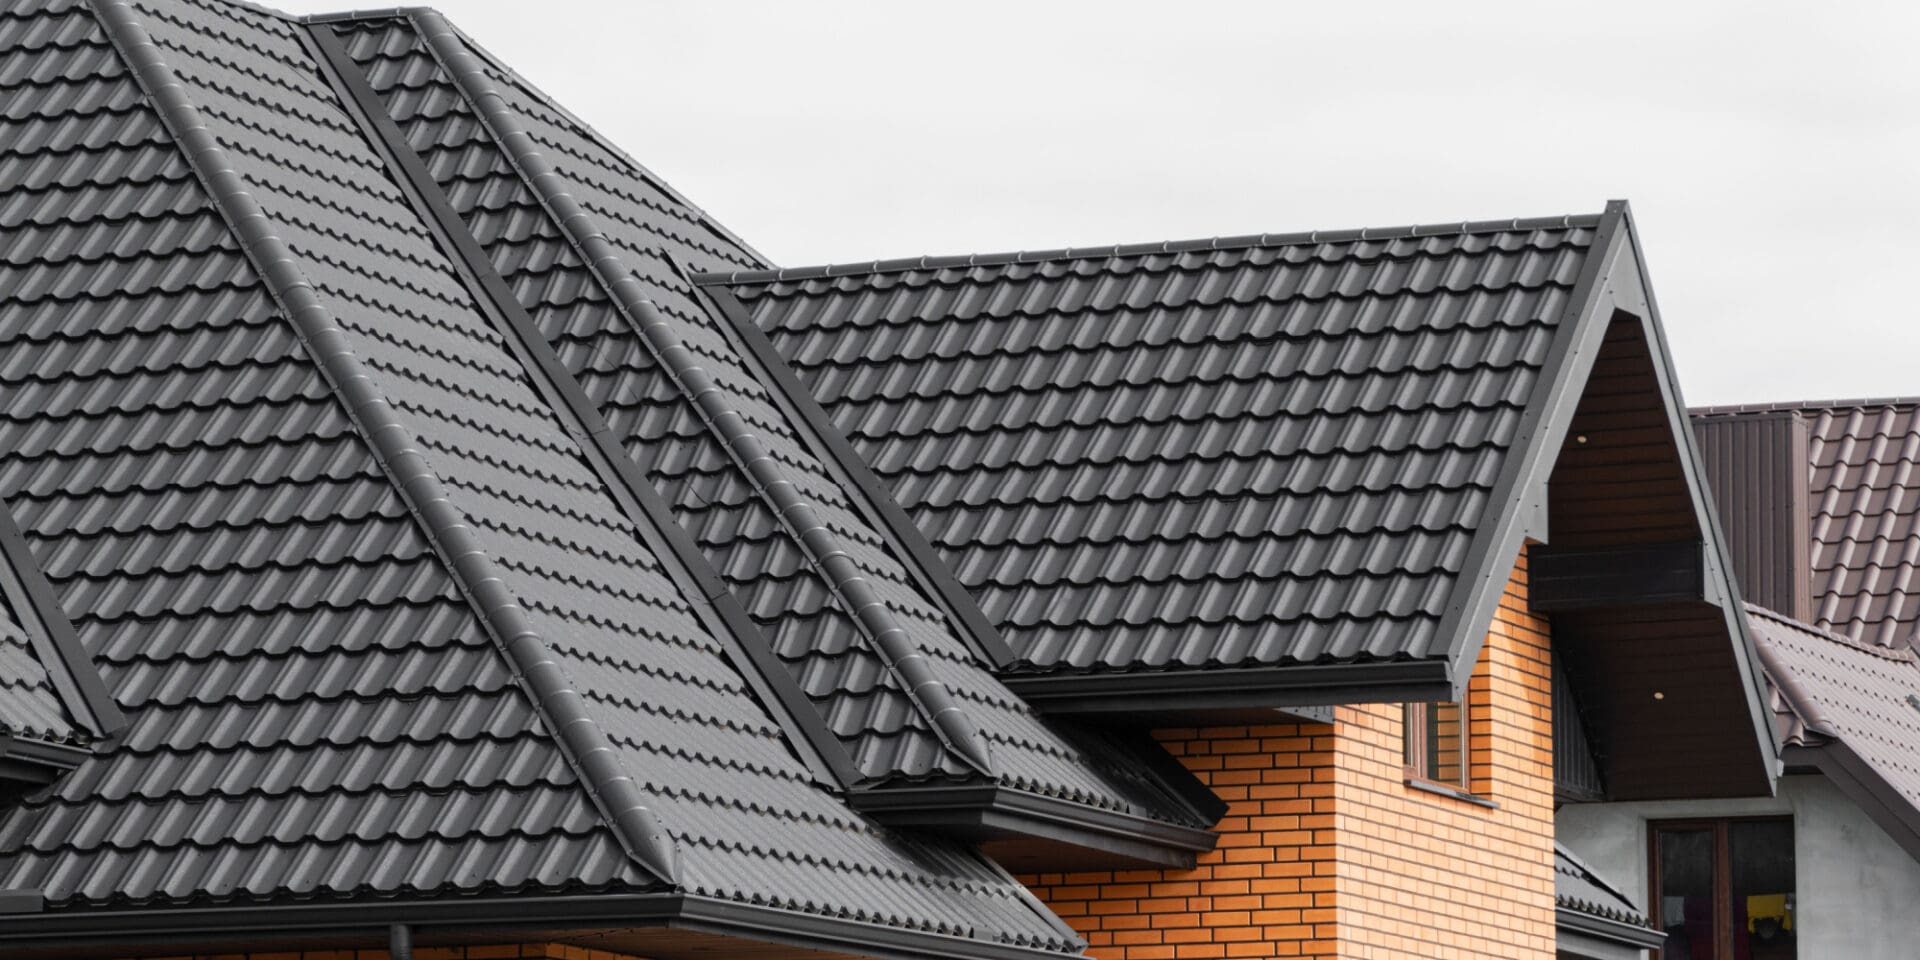 Metal Roofing Prices: How Are They Calculated